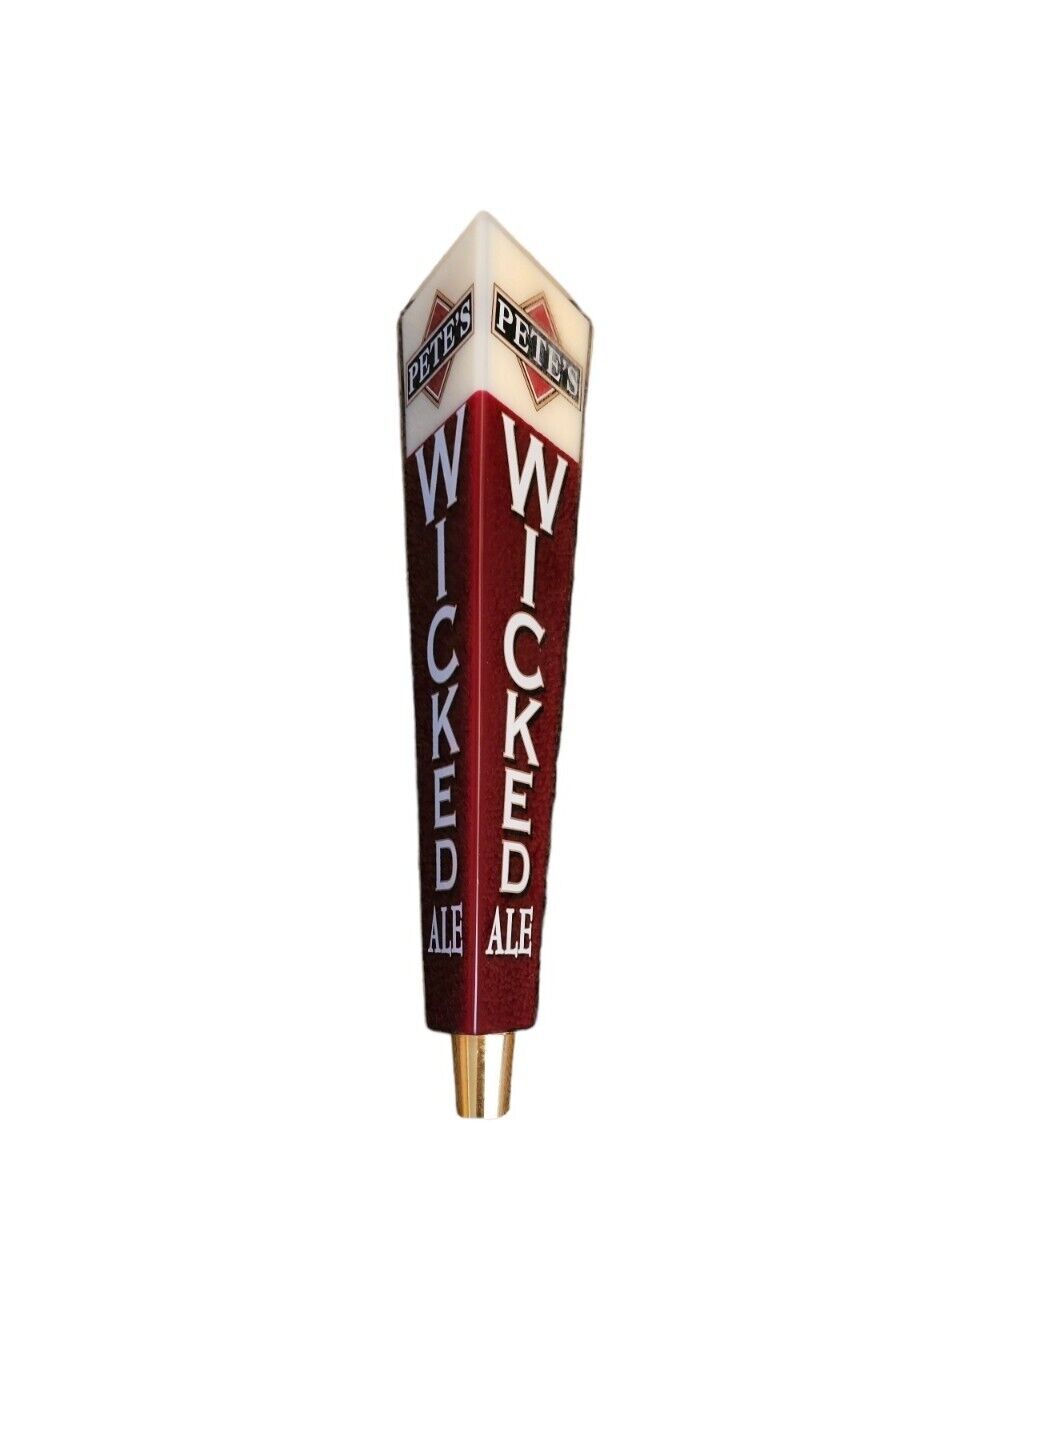 Pete\'s Wicked Ale Logo Beer Tap Handle Pull Knob 11\